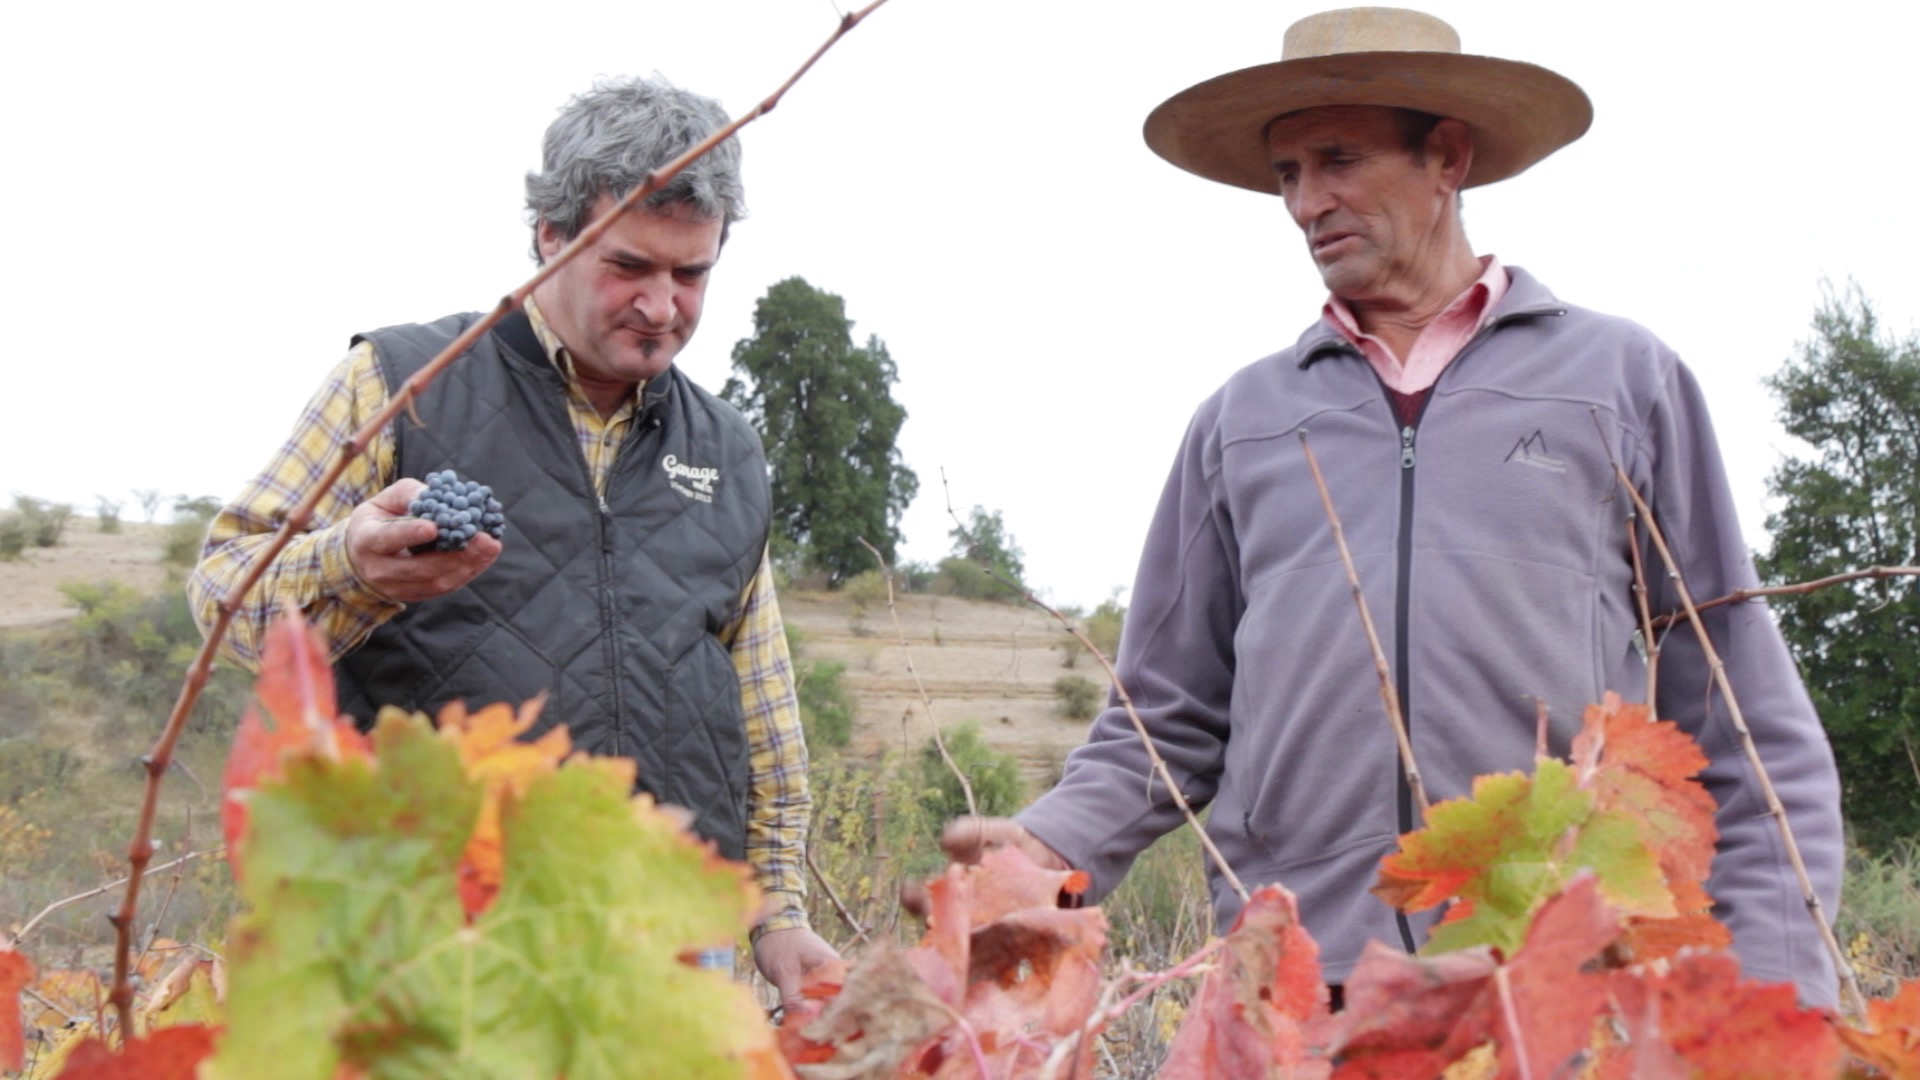 Why MOVI, the Chilean Movement of Independent Vintners, is important